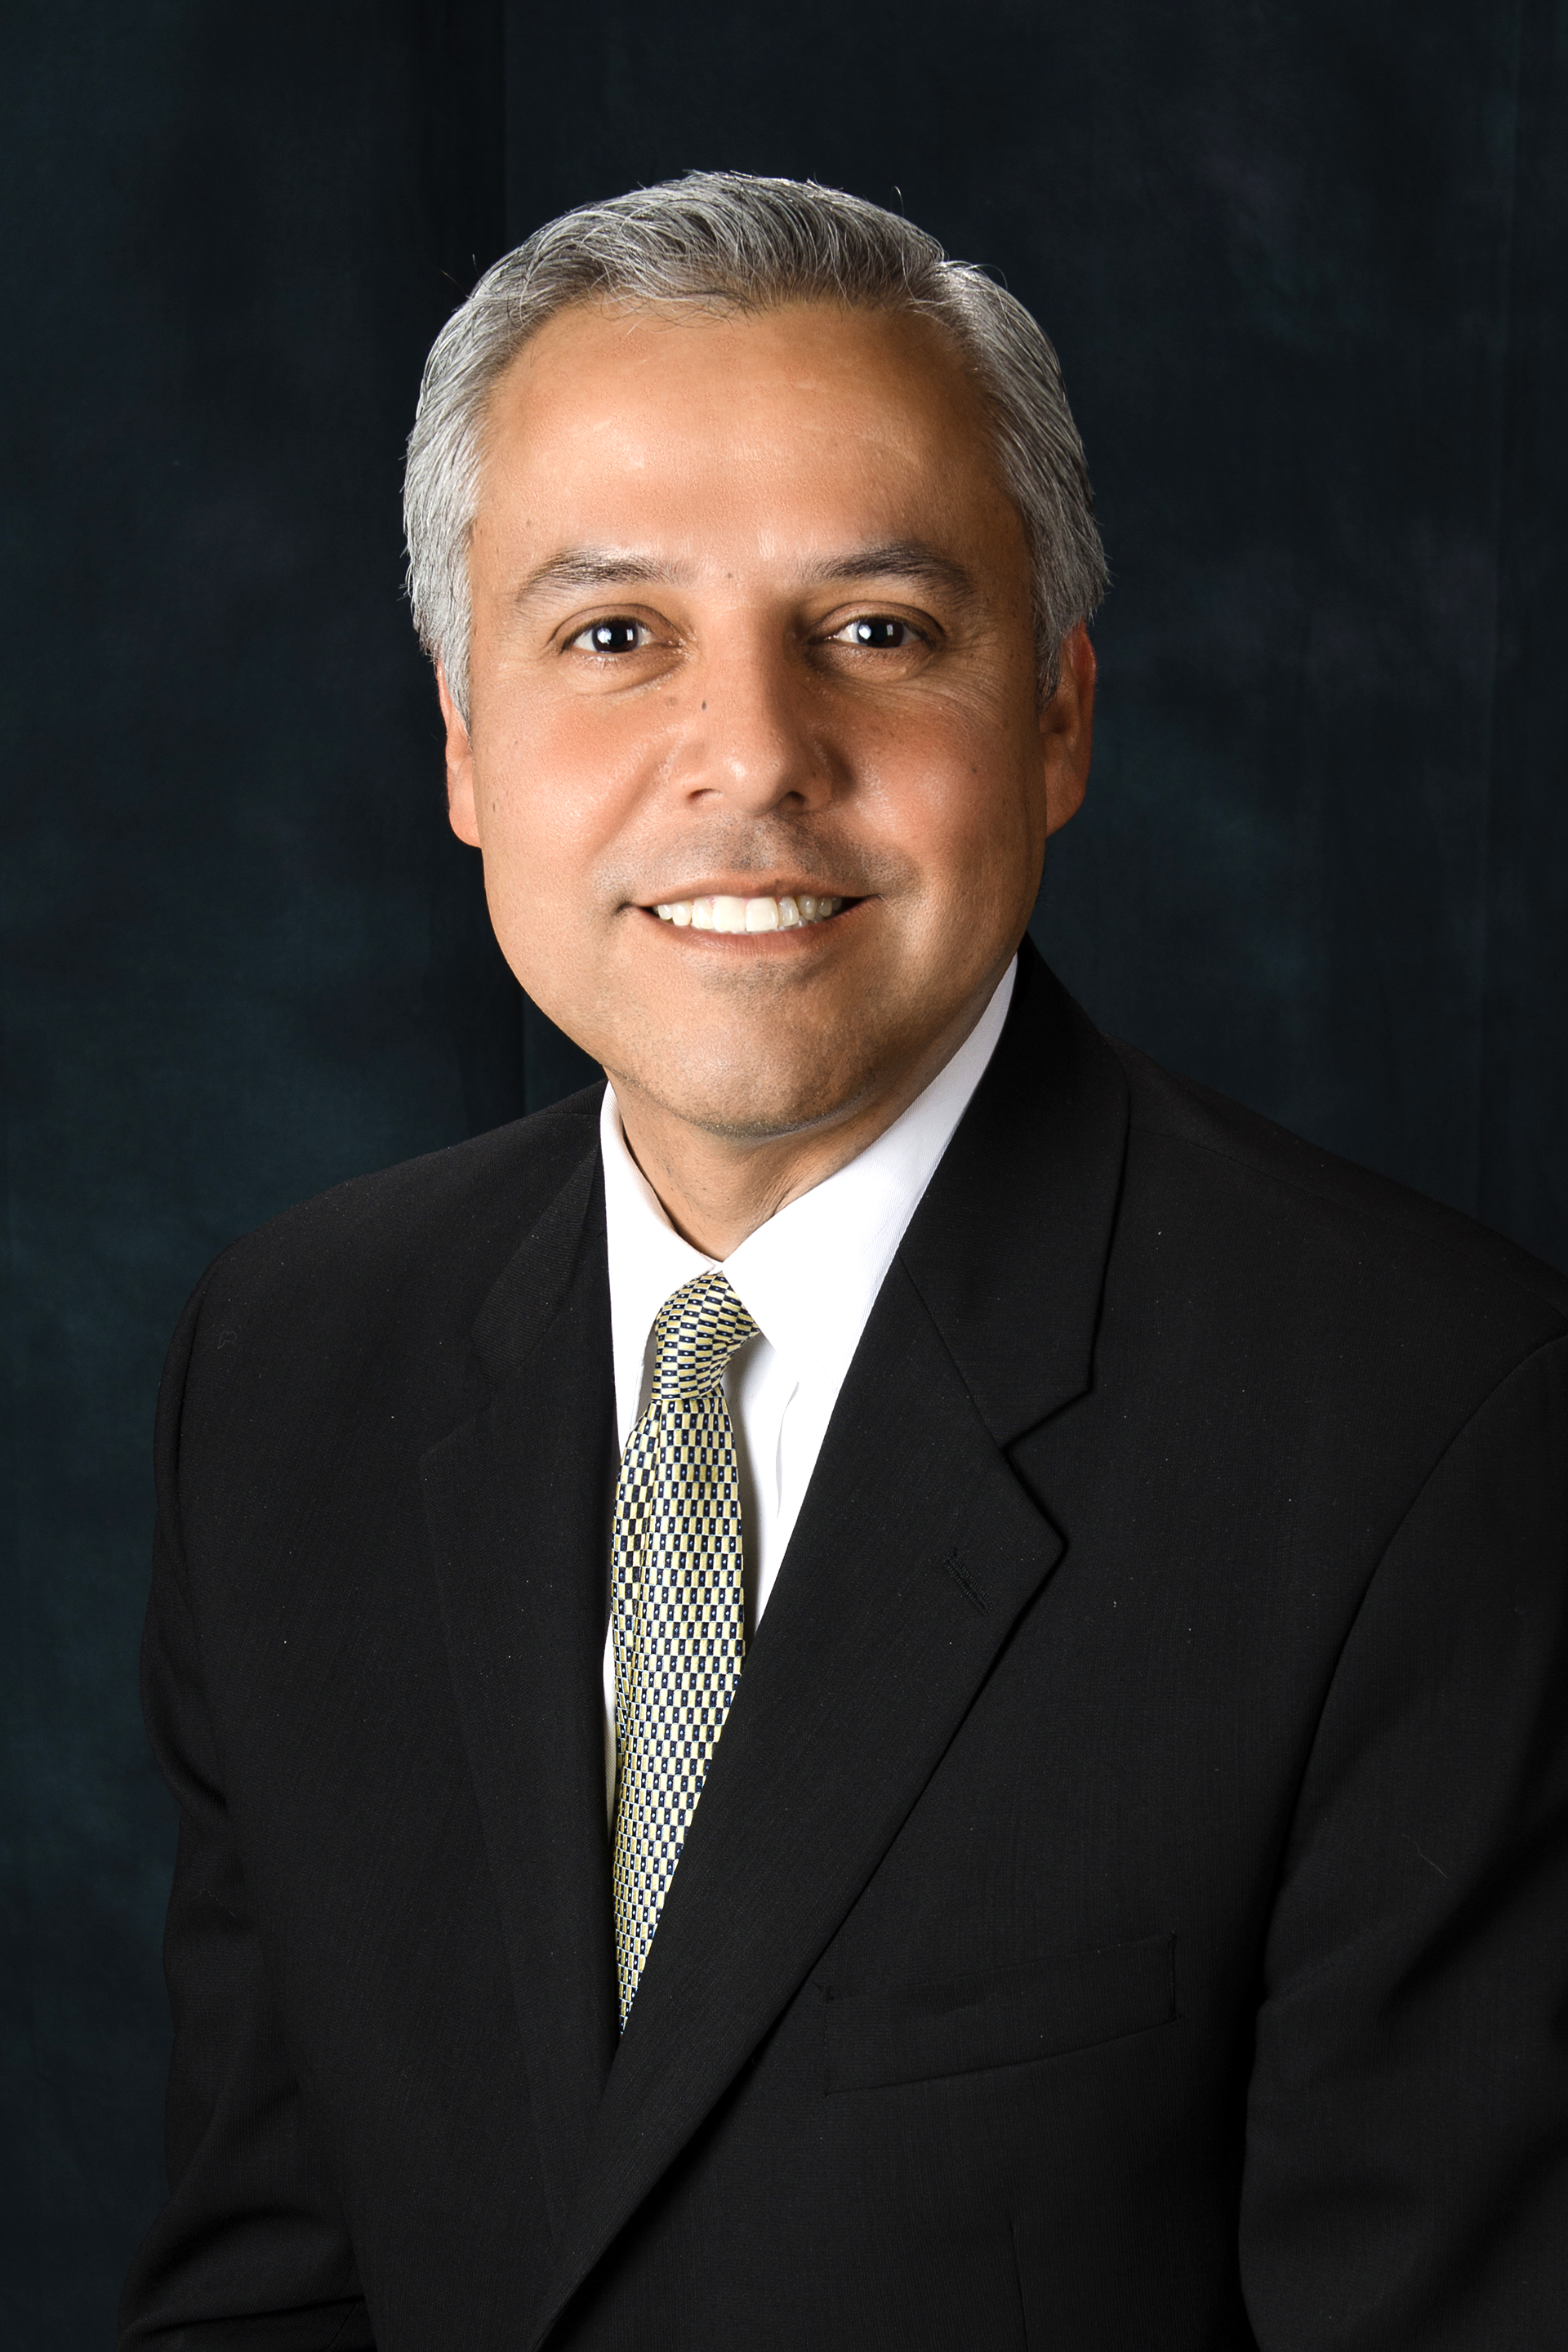 Dr. Art Cavazos selected for White House National ConnectED Superintendents Summit